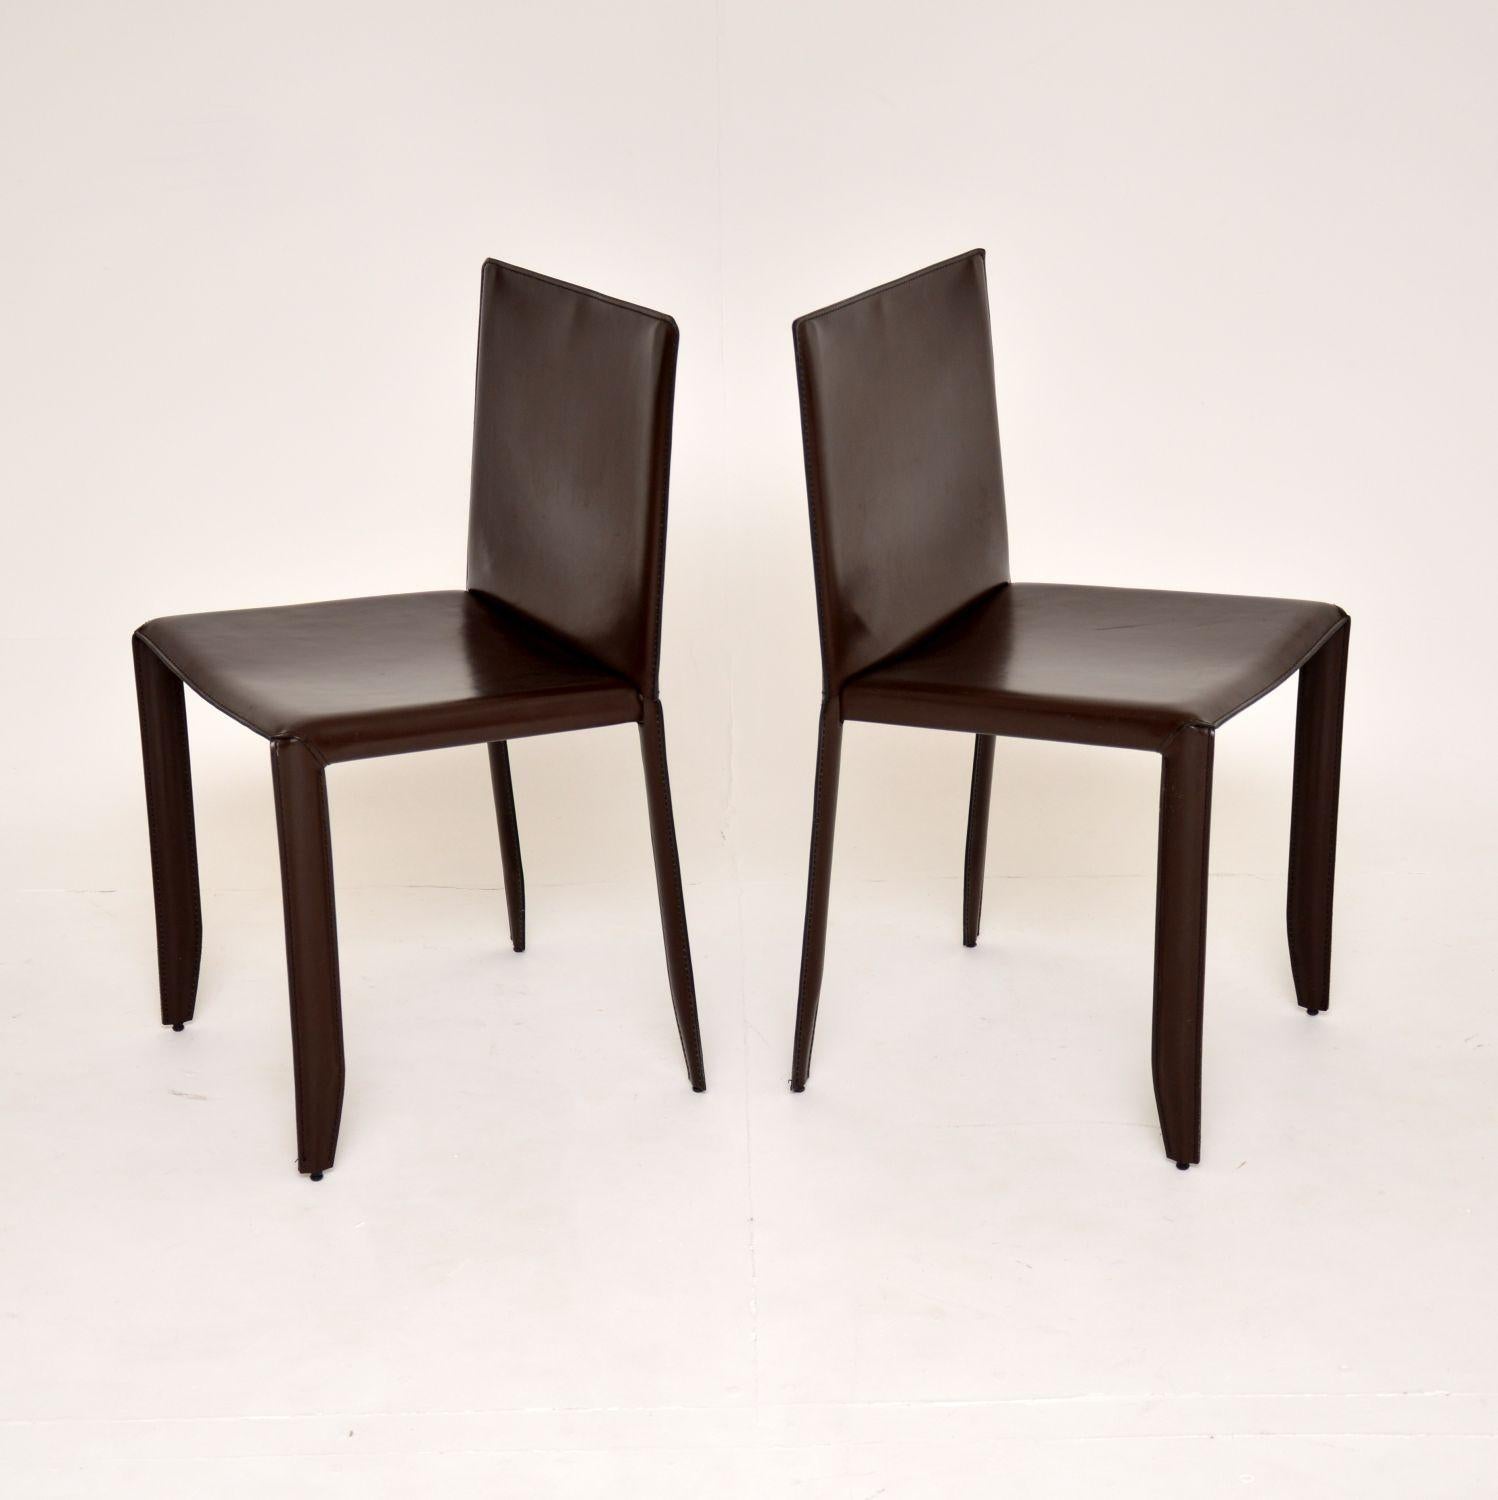 Contemporary Pair of Modernist Italian Leather Side Chairs by Cattelan Italia